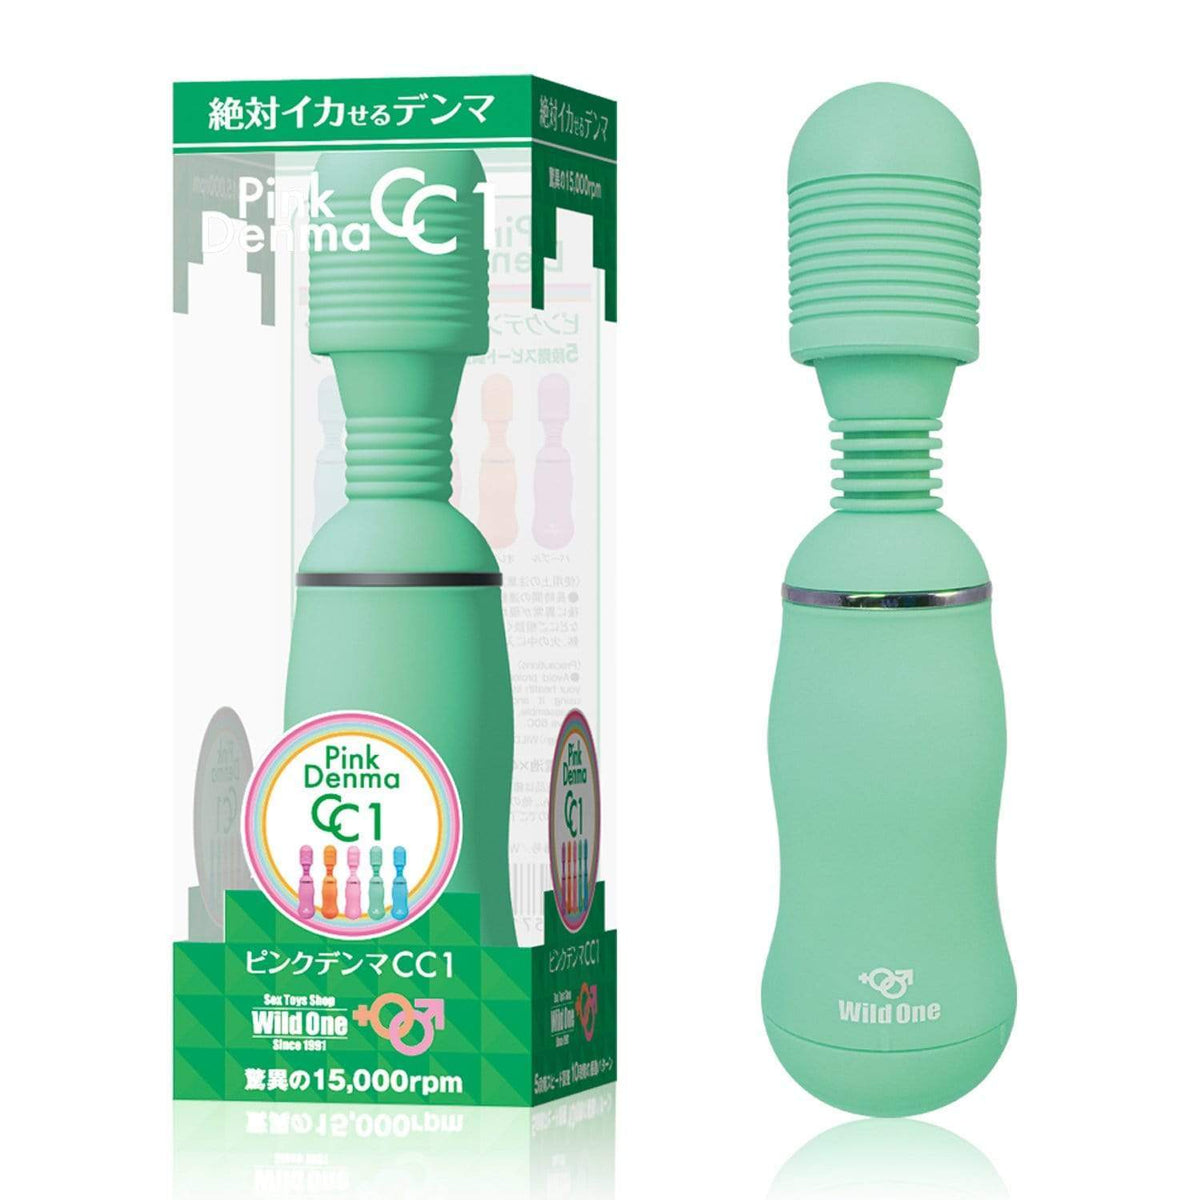 Wild One - Pink Denma CC1 Wand Massager (Green) -  Wand Massagers (Vibration) Non Rechargeable  Durio.sg